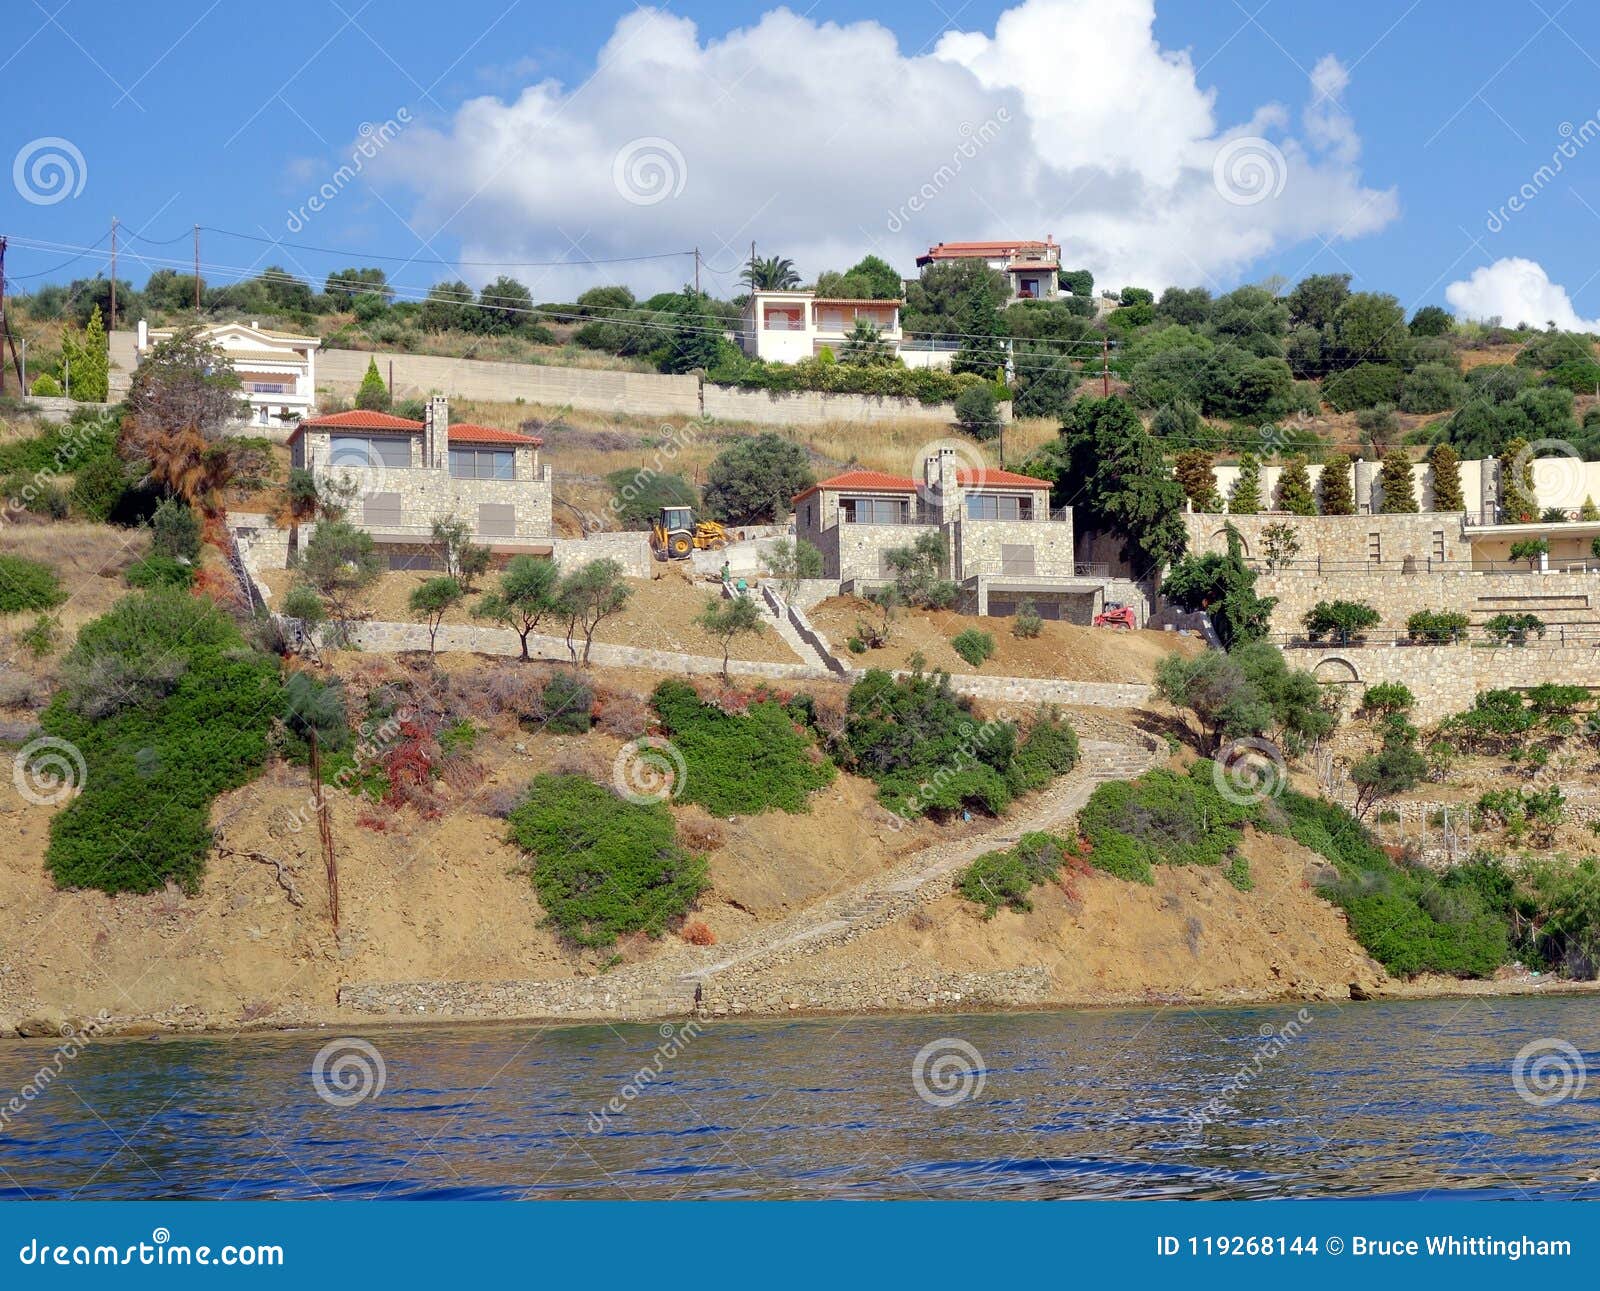 Waterside Residential Construction Site, Greece Editorial Stock Image ...